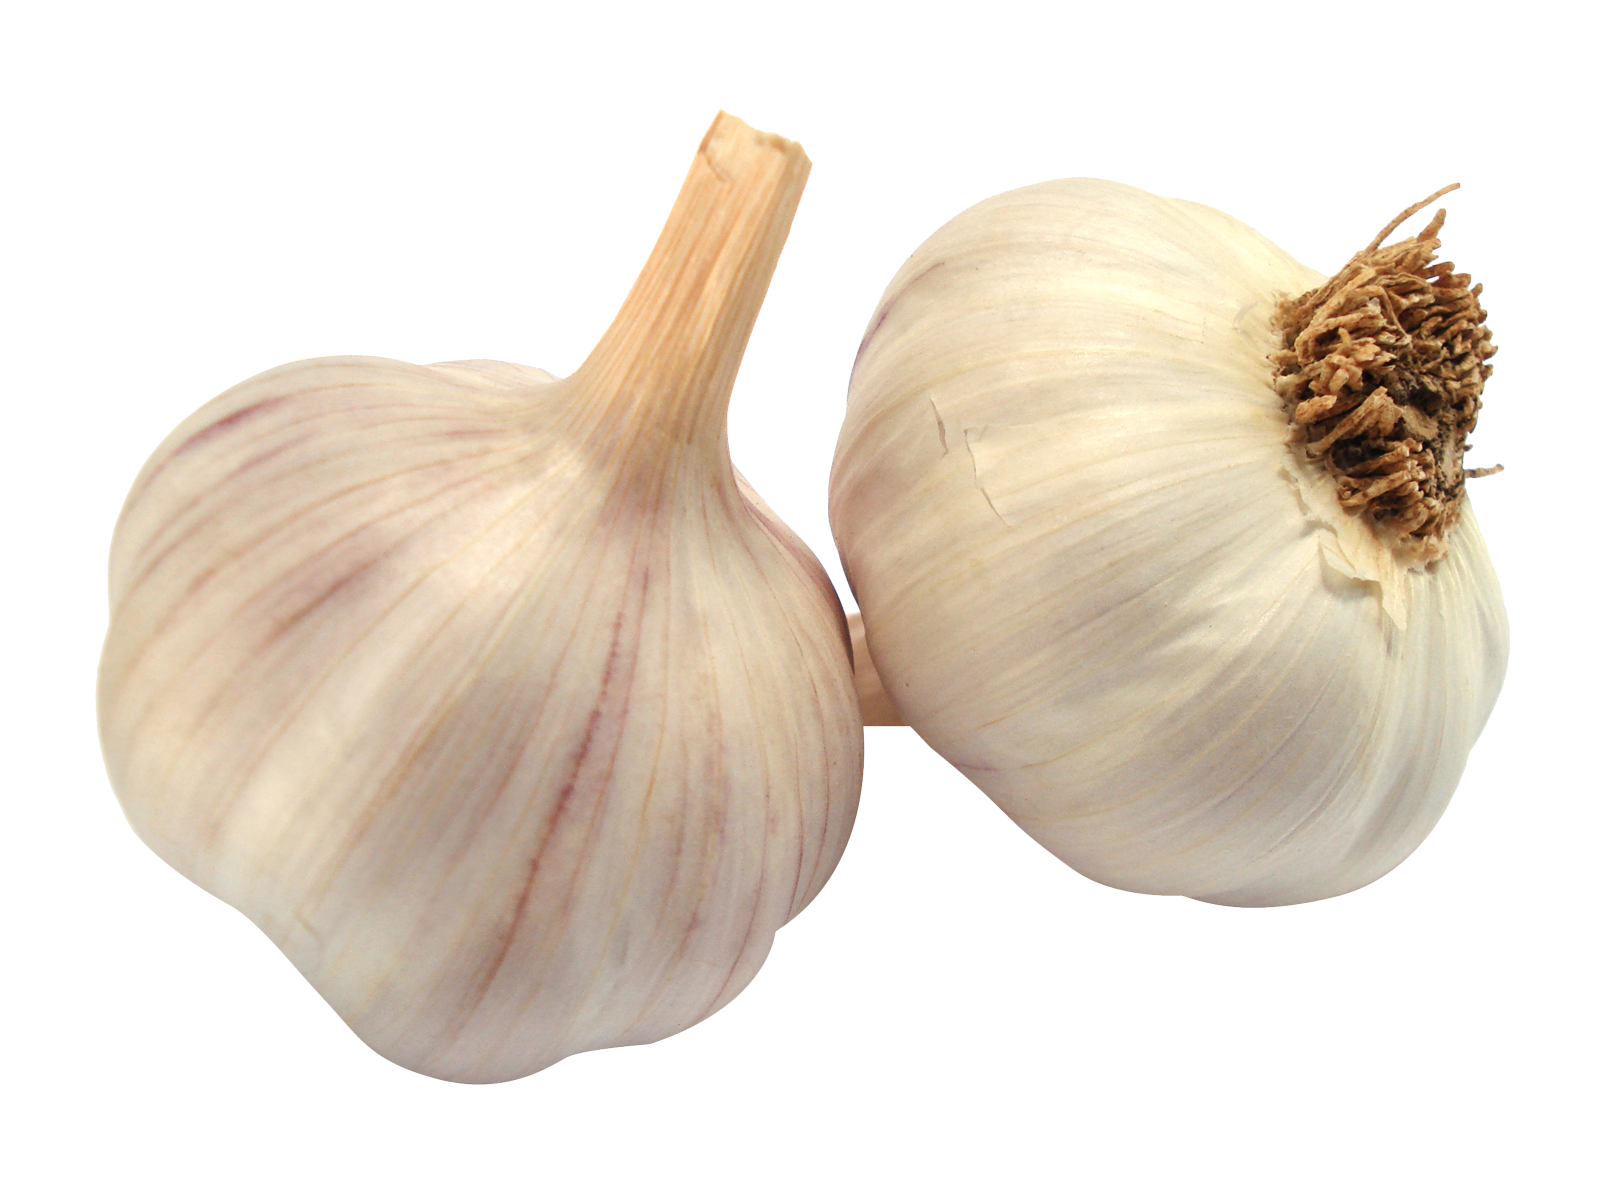 Garlic wallpapers, Food, HQ Garlic pictures | 4K Wallpapers 2019